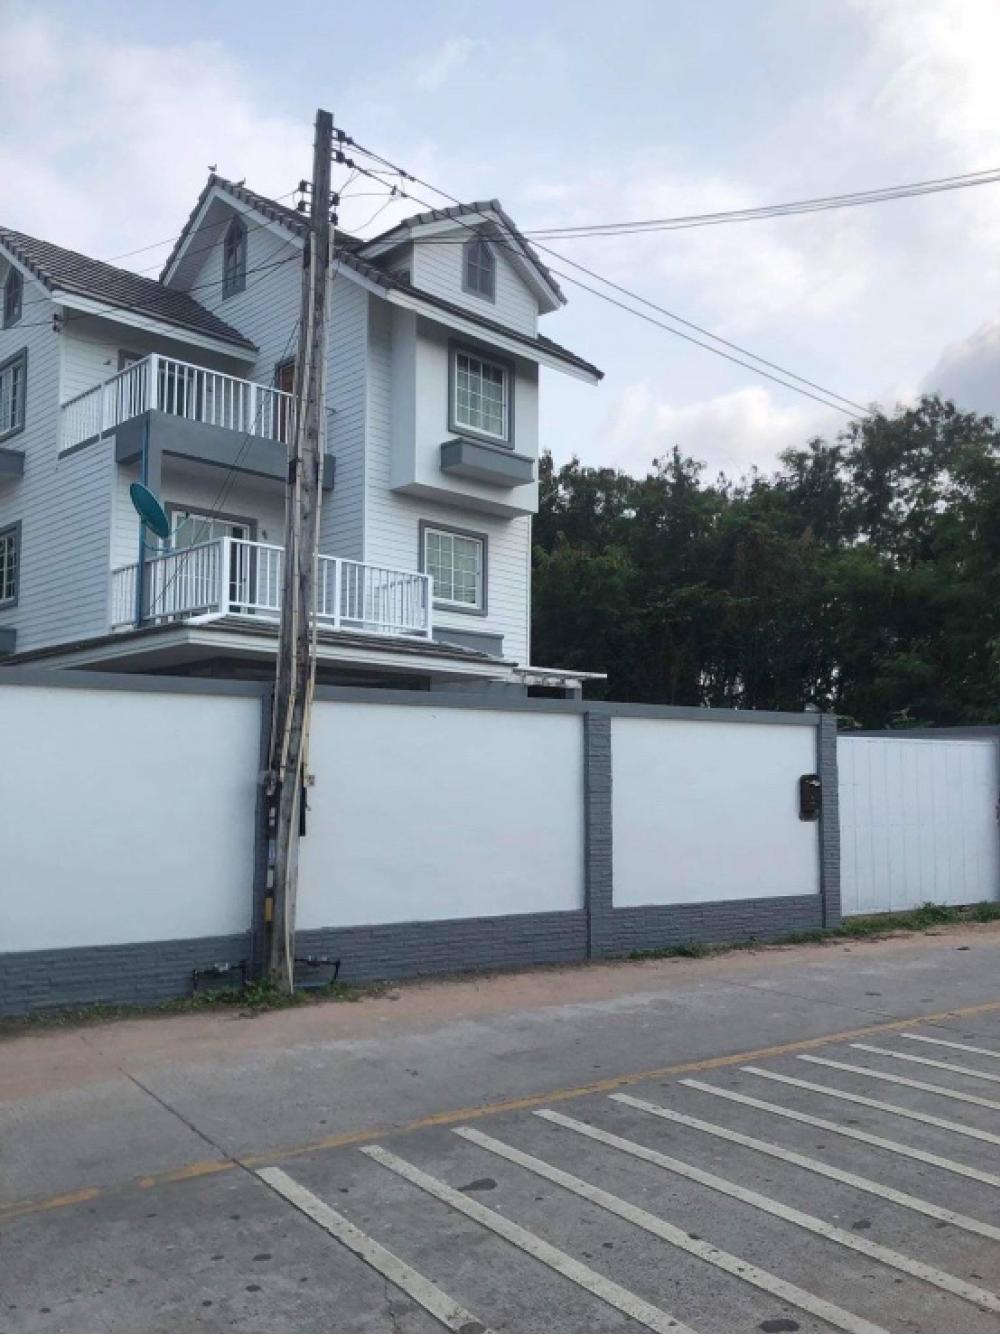 For RentHousePattaya, Bangsaen, Chonburi : 3-story detached house, land area approximately 60 sq m., 3 bedrooms, 3 bathrooms, total usable area approximately 200 sq m. Inside the house there is furniture, air conditioning, electrical appliances, Sriracha Road, Chonburi, near Chain Paul School.